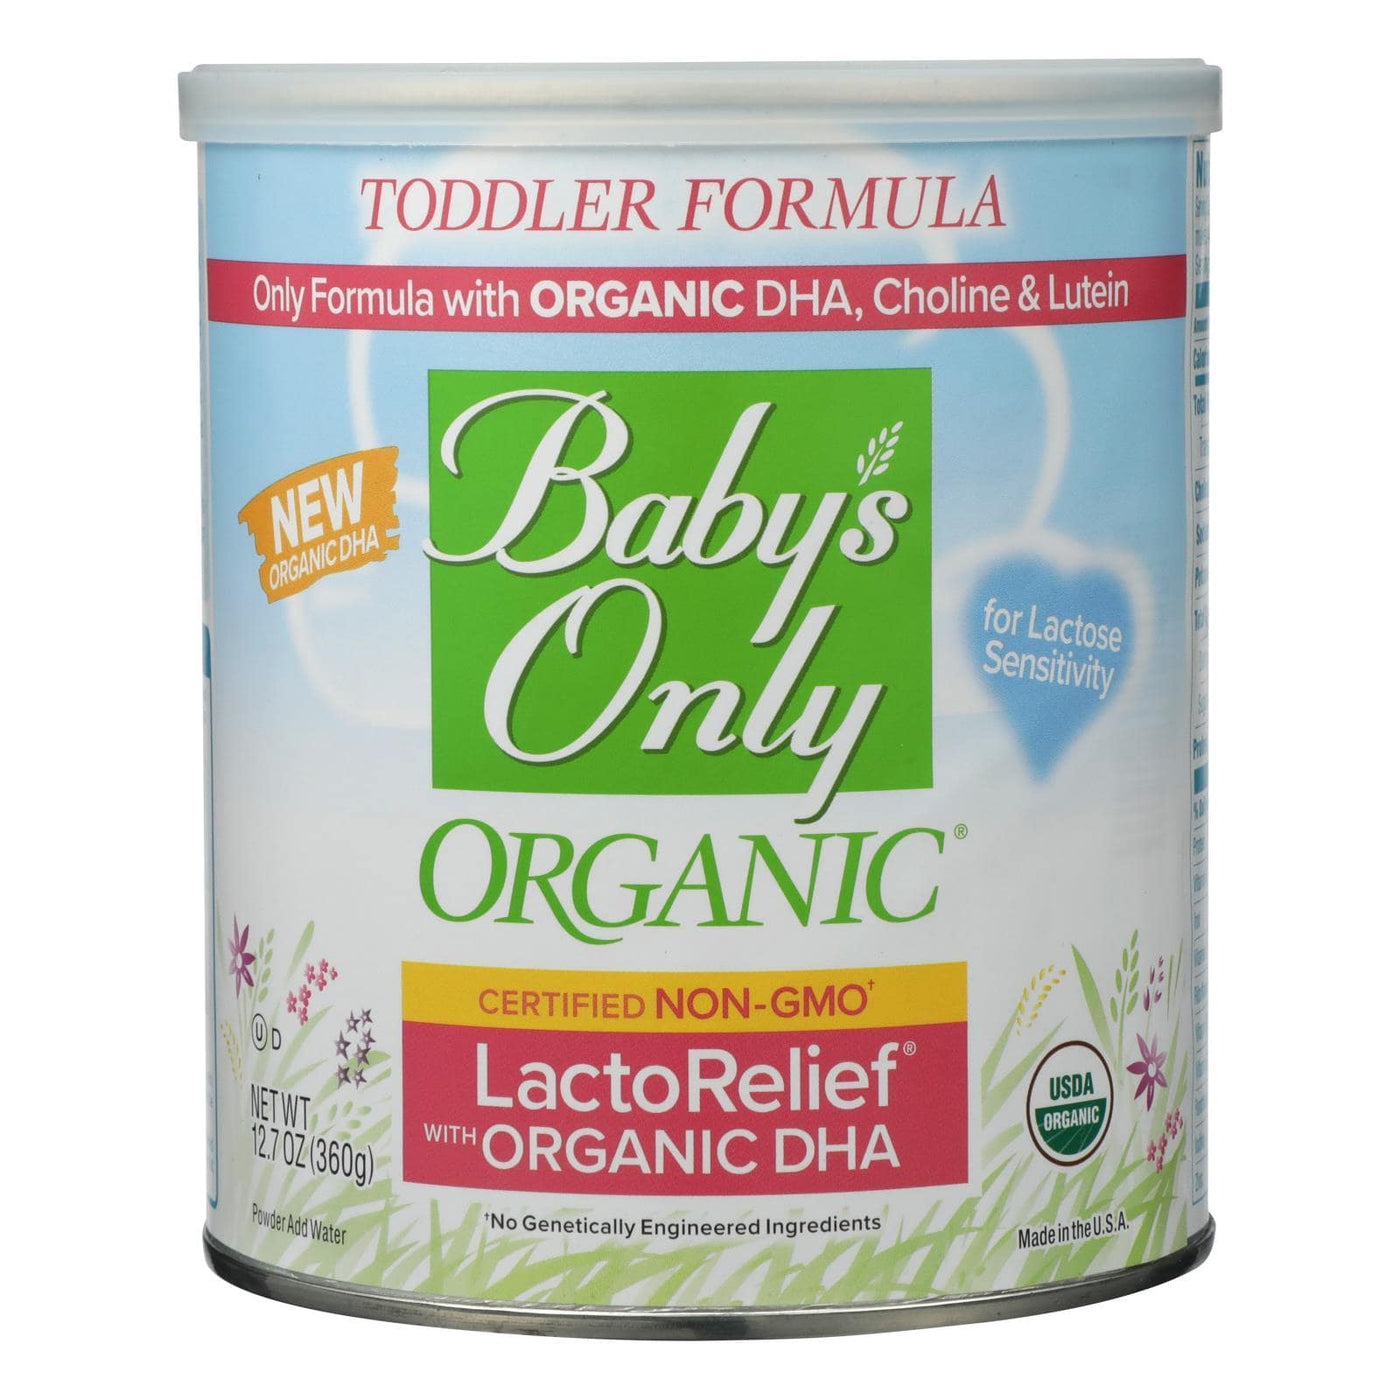 Babys Only Organic Toddler Formula - Organic - Lactorelief - Lactose Free - 12.7 Oz - Case Of 6 | OnlyNaturals.us